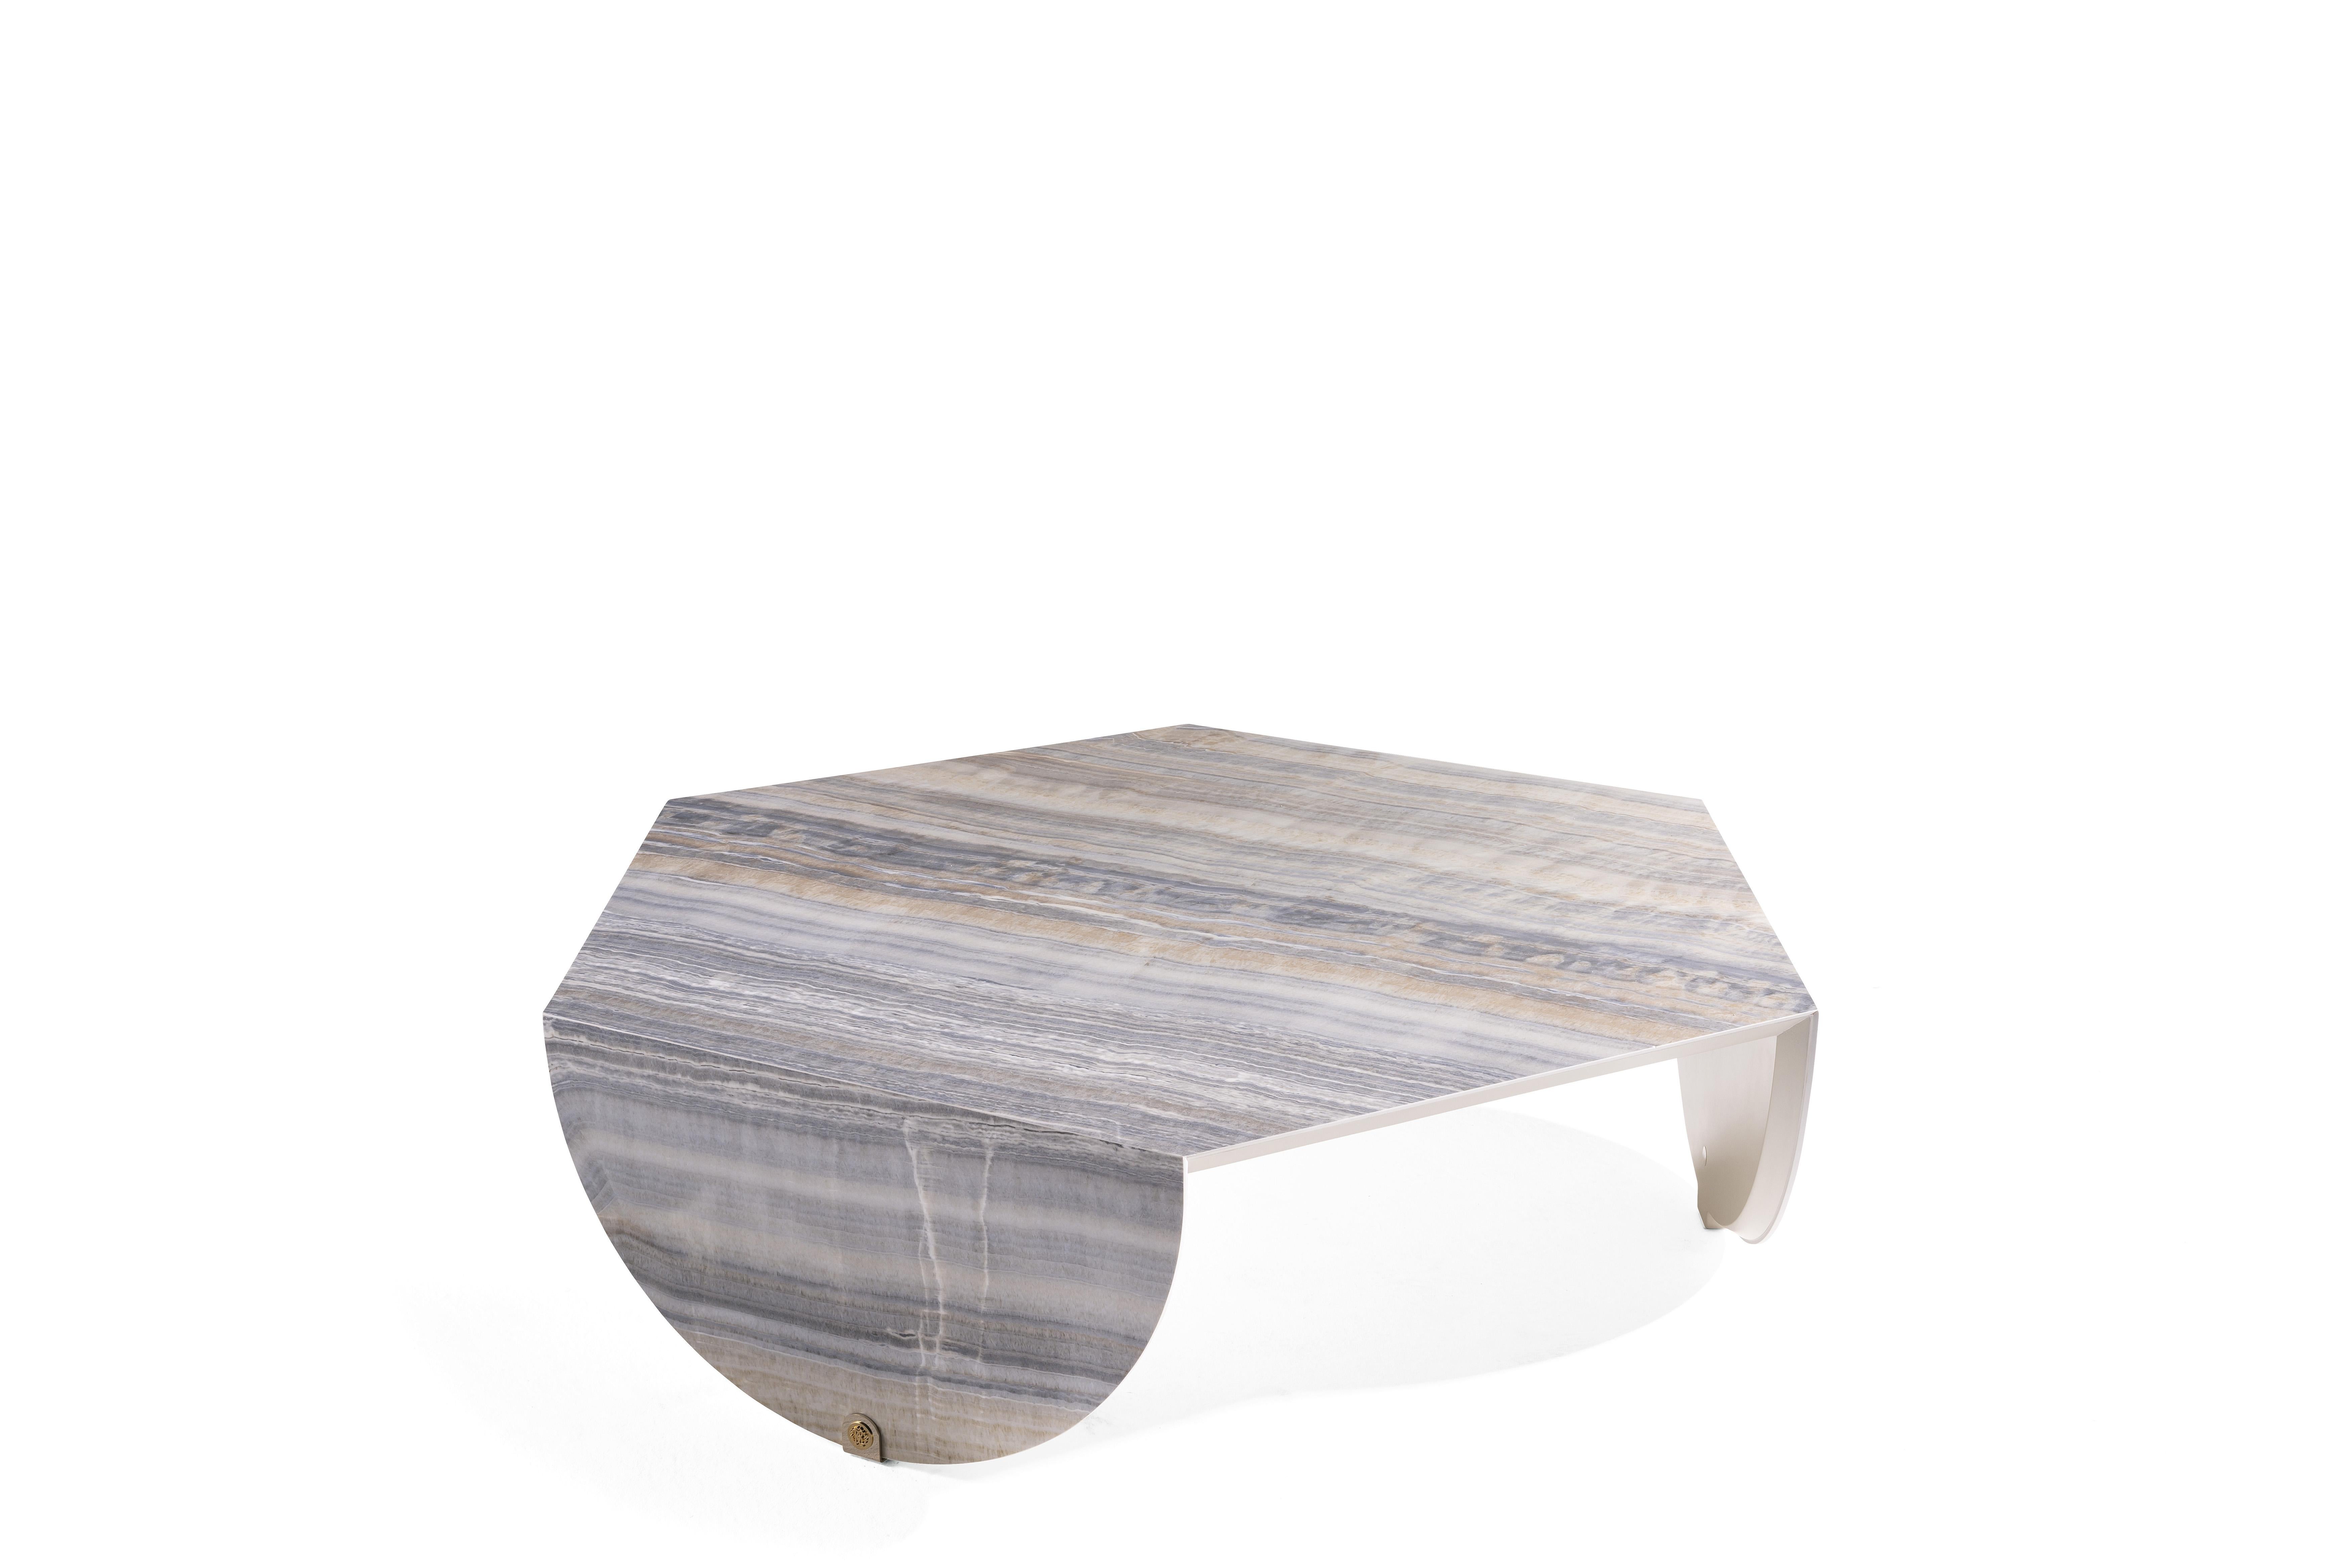 Modern 21st Century Inagua Central Table in Grey Gres by Roberto Cavalli Home Interiors For Sale